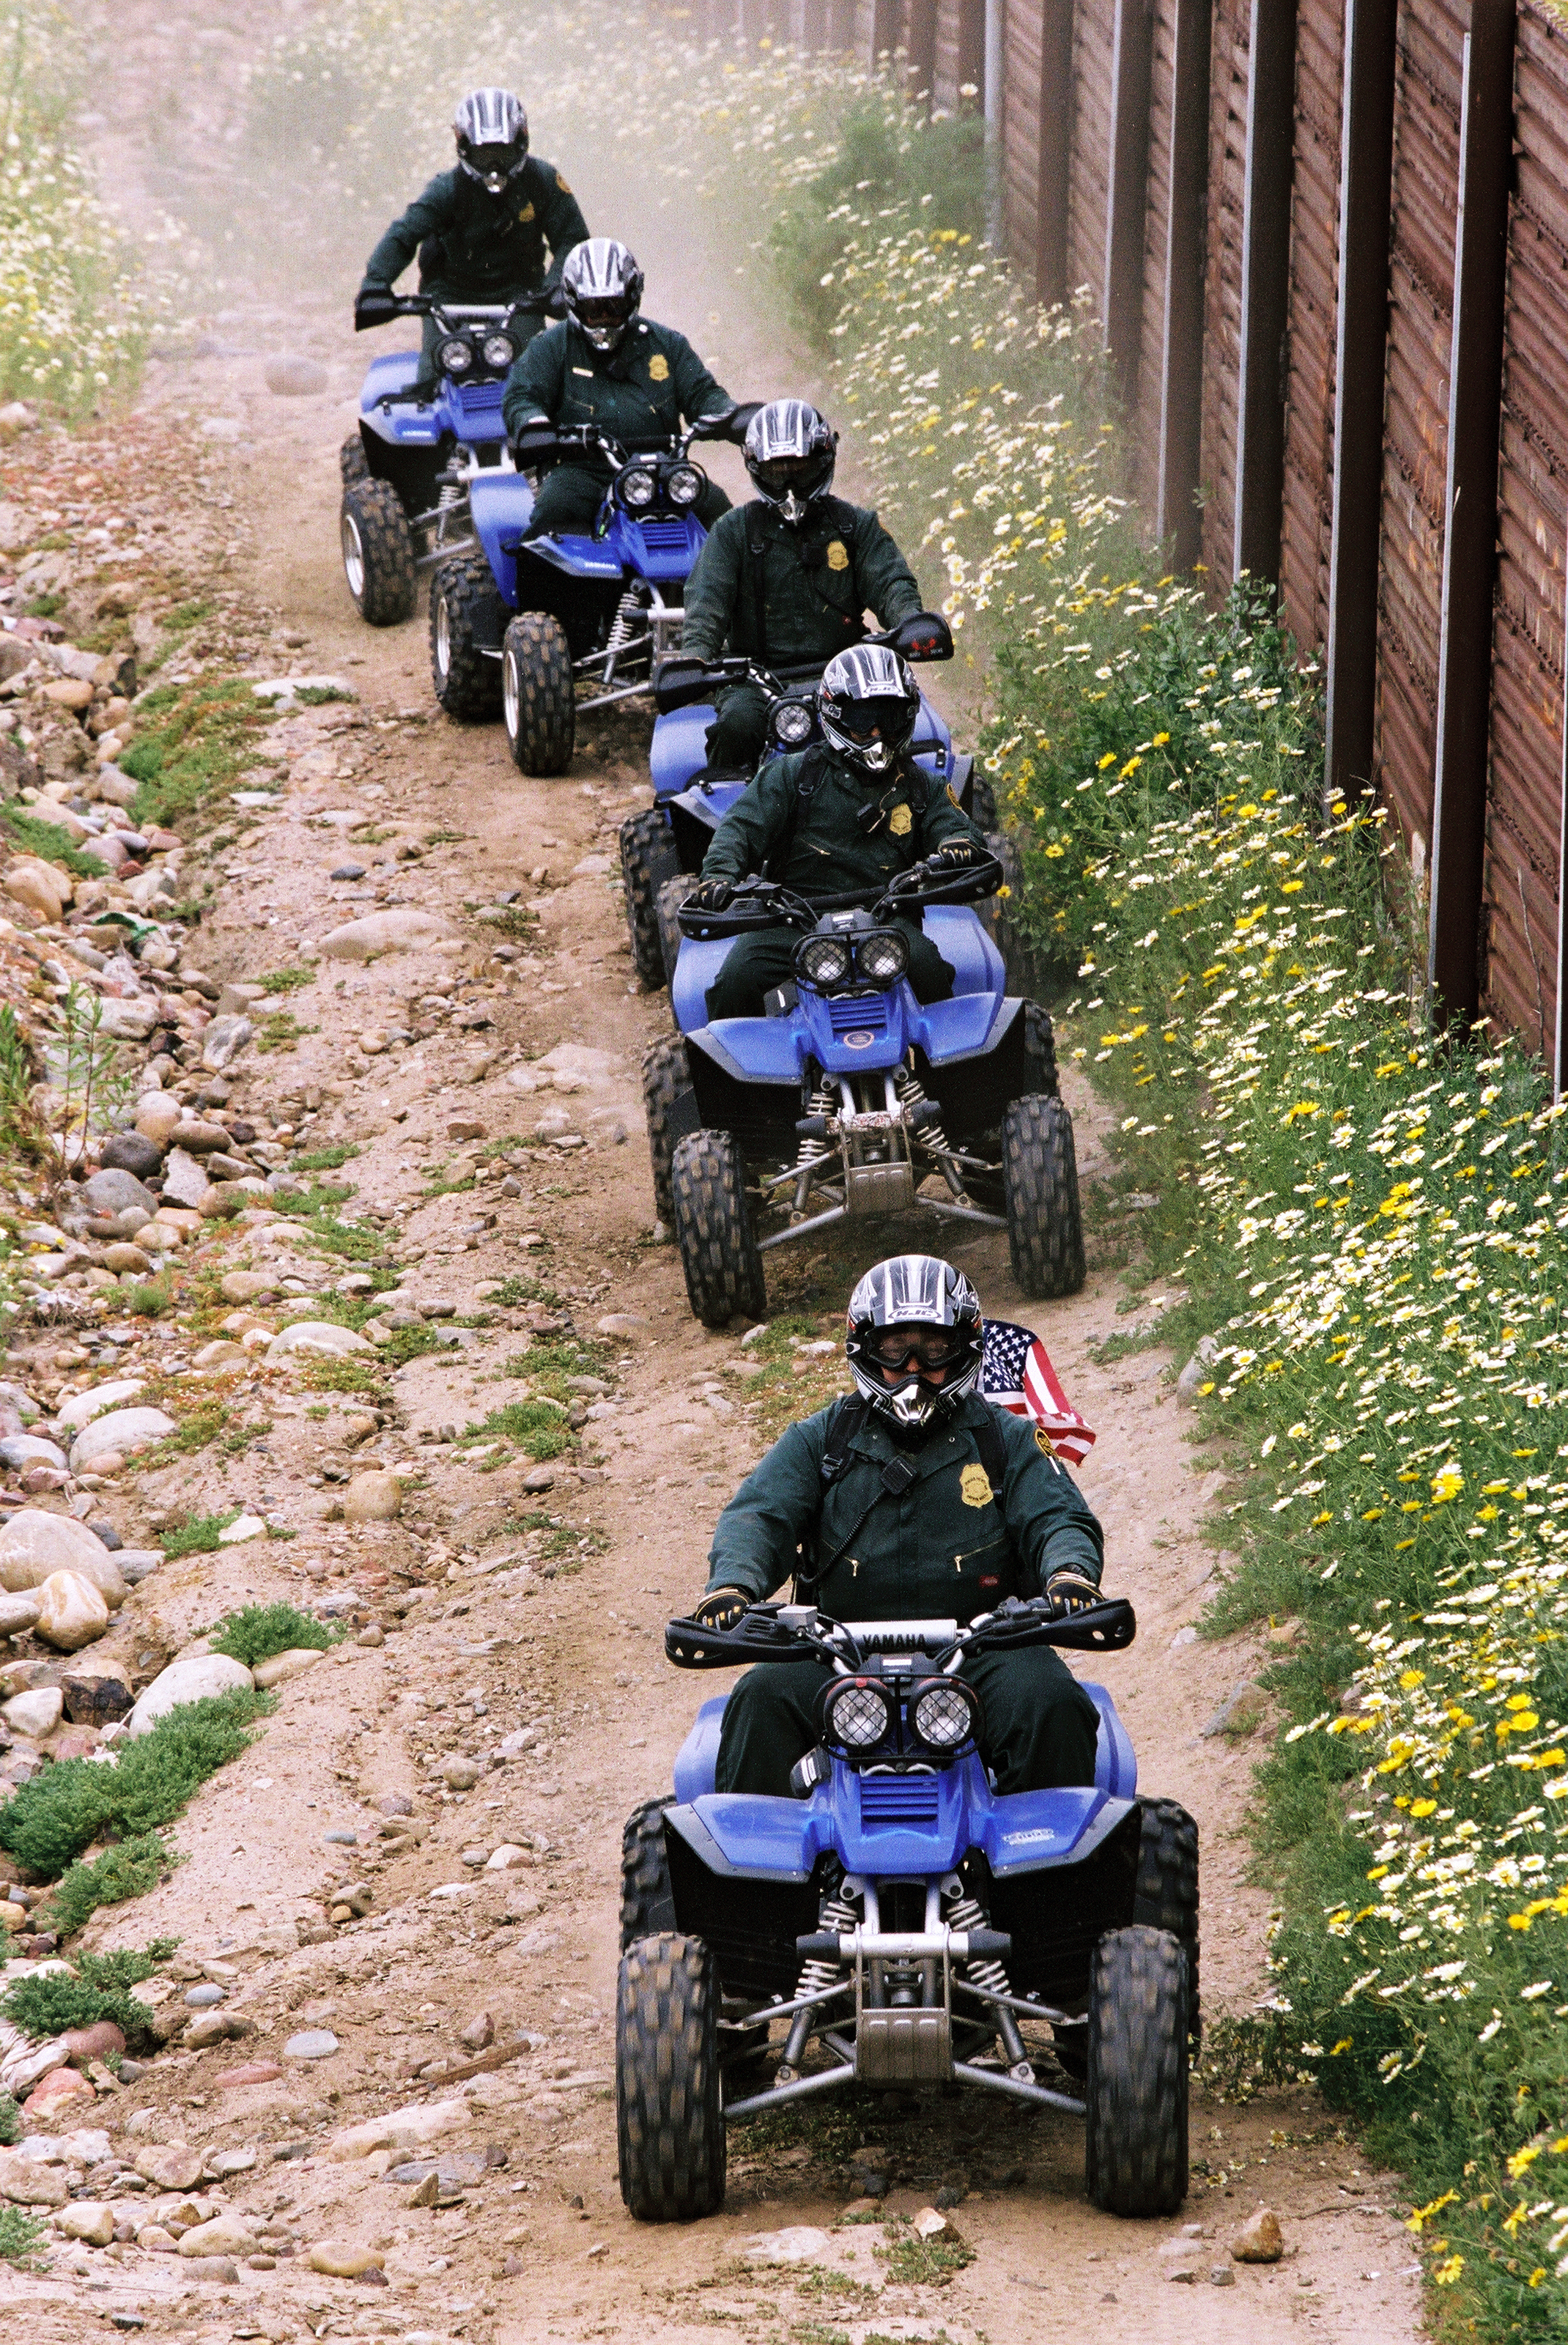 Border Patrol agents makes use of All Terrain Vehicles to patrol along the rugged border with Mexico.